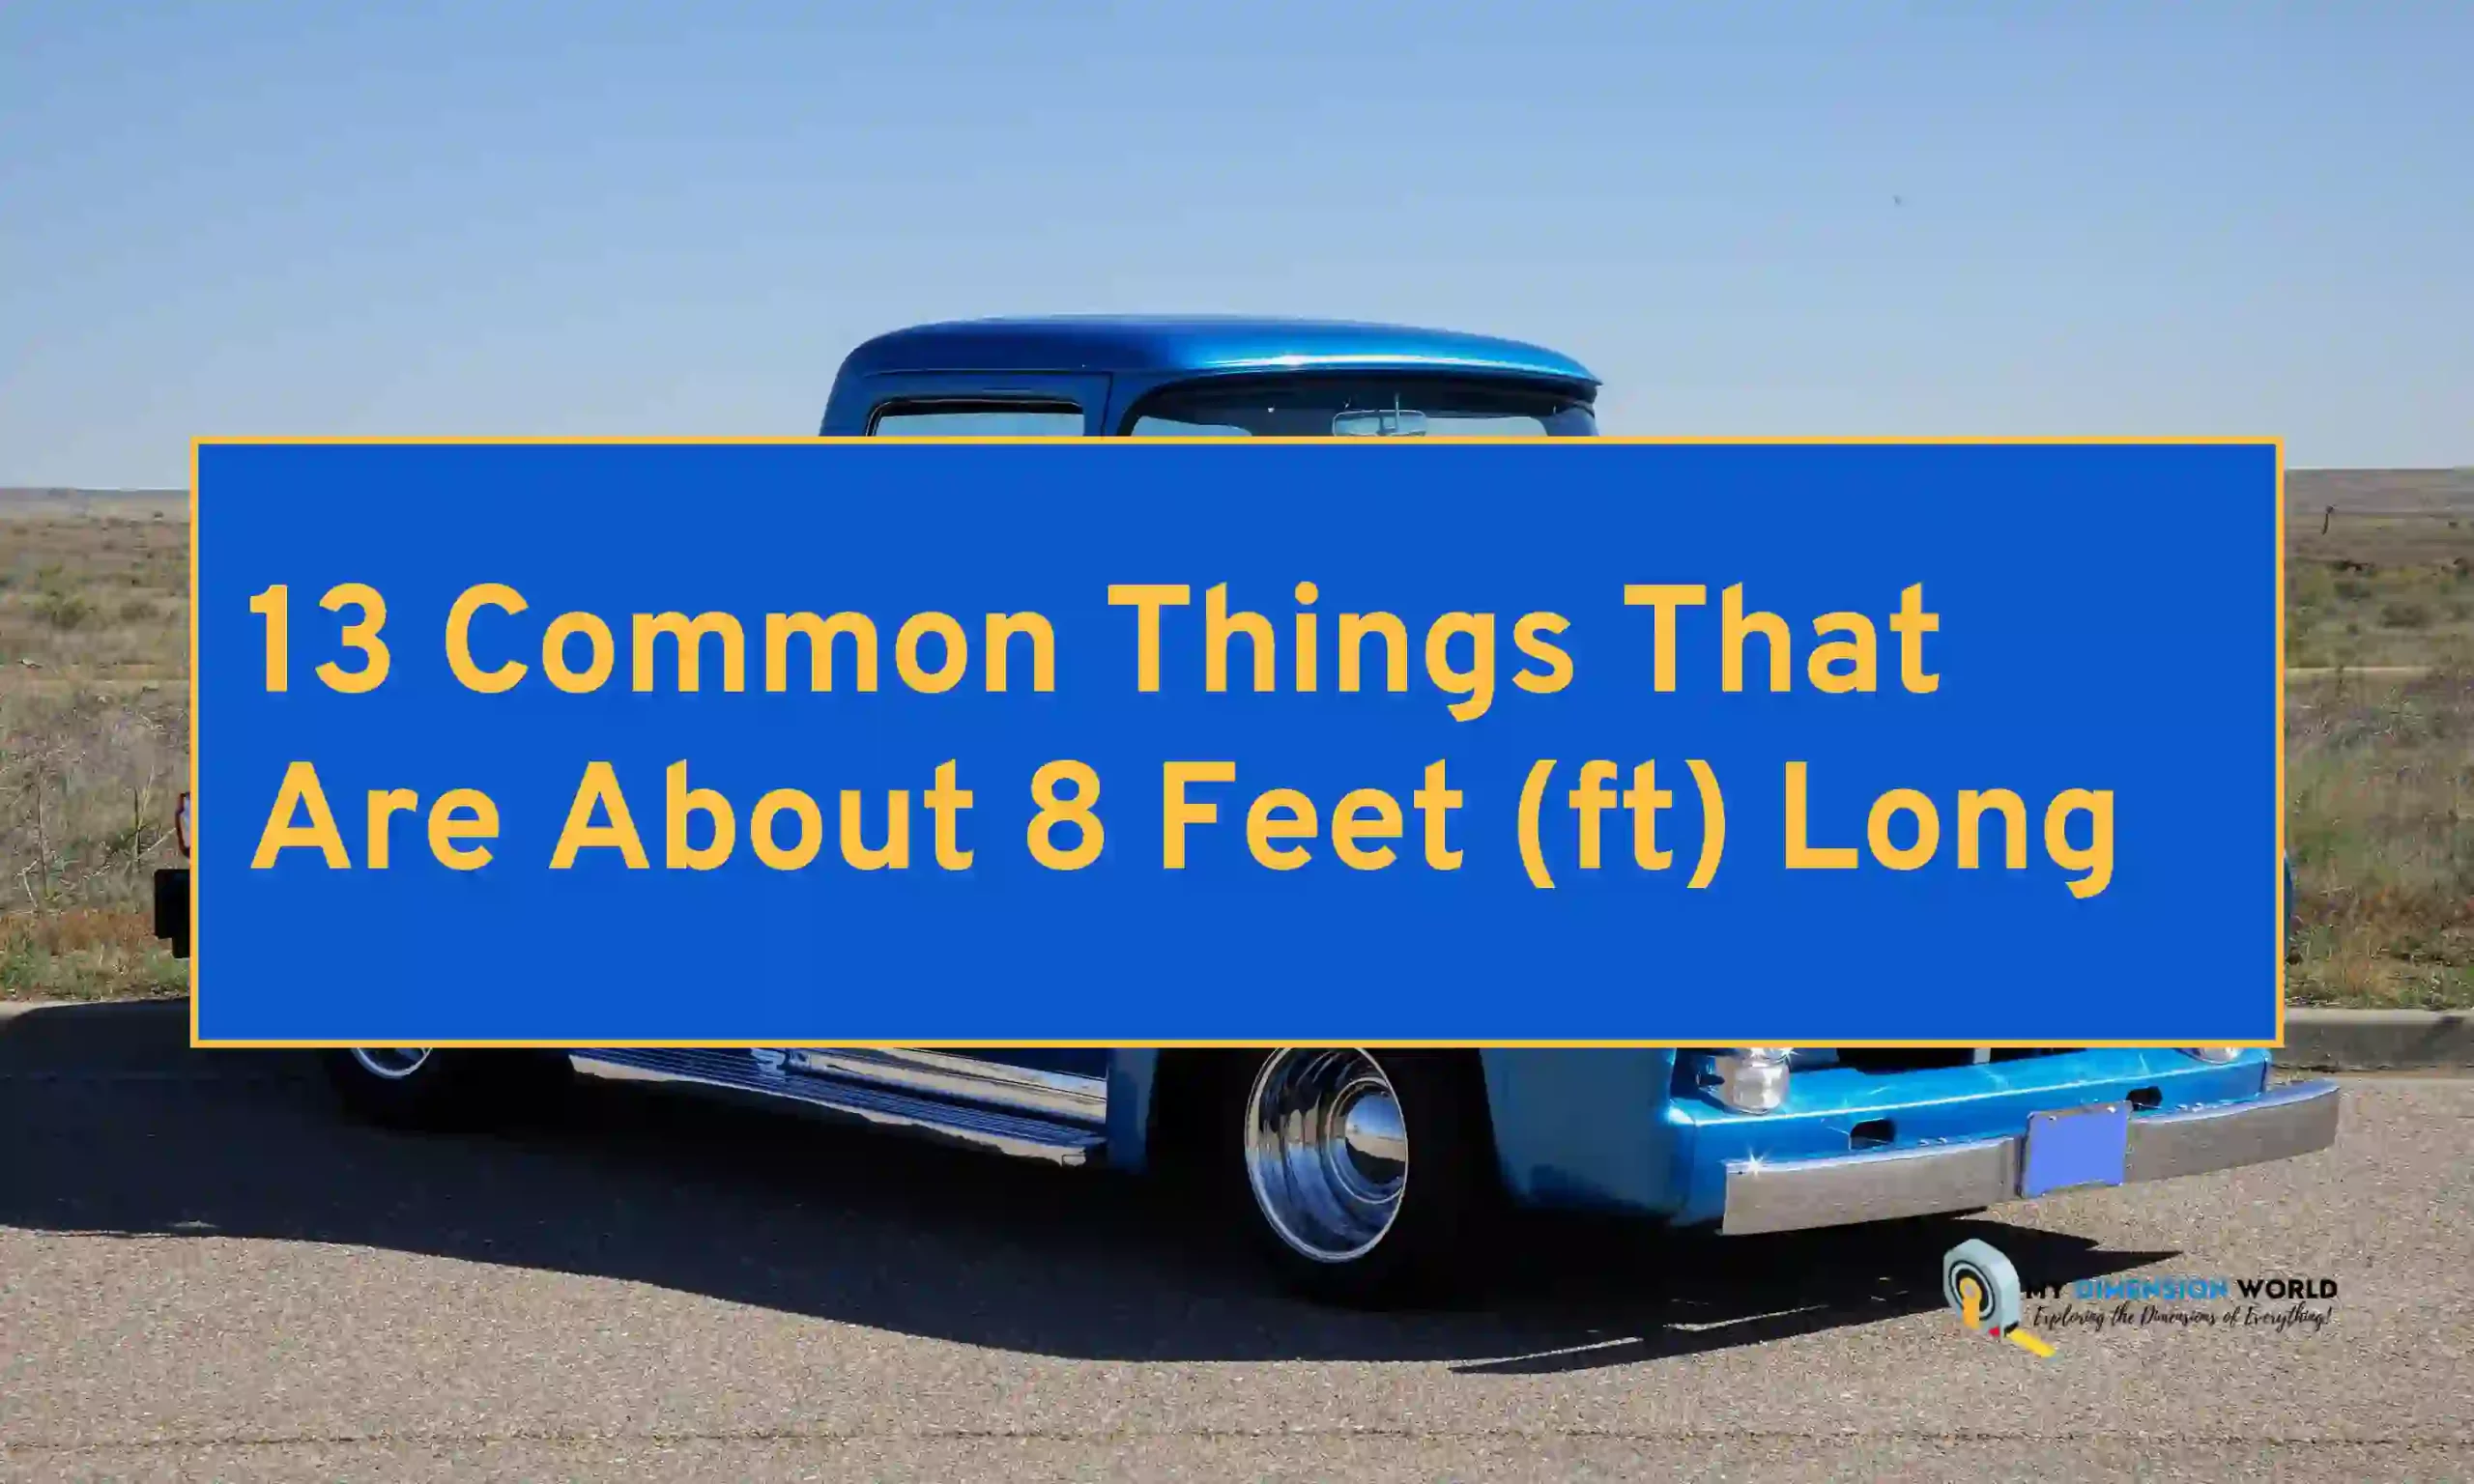 13 Common Things That Are About 8 Feet (ft) Long